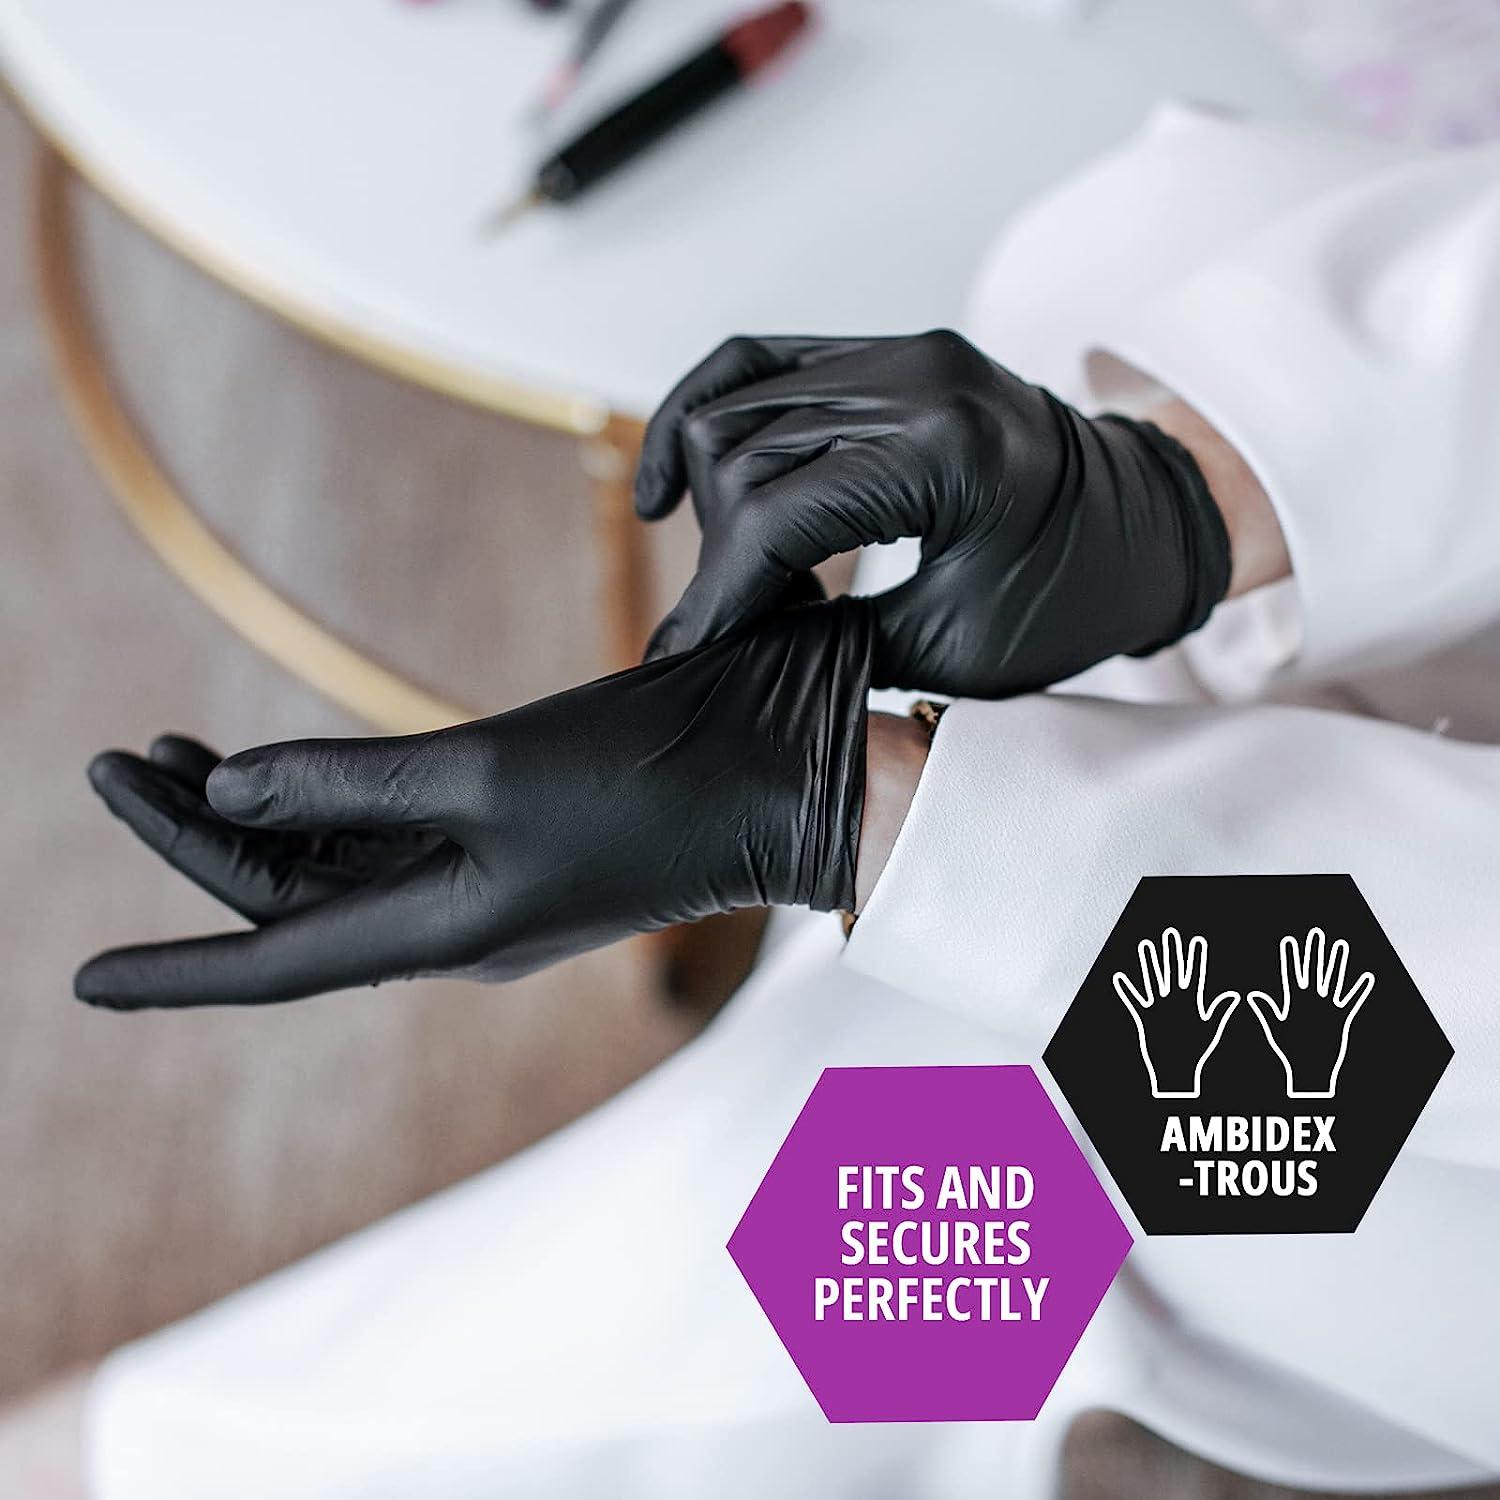 Hand-E Black Nitrile Gloves, Perfect for Cleaning & Cooking - 50 Pack, Small